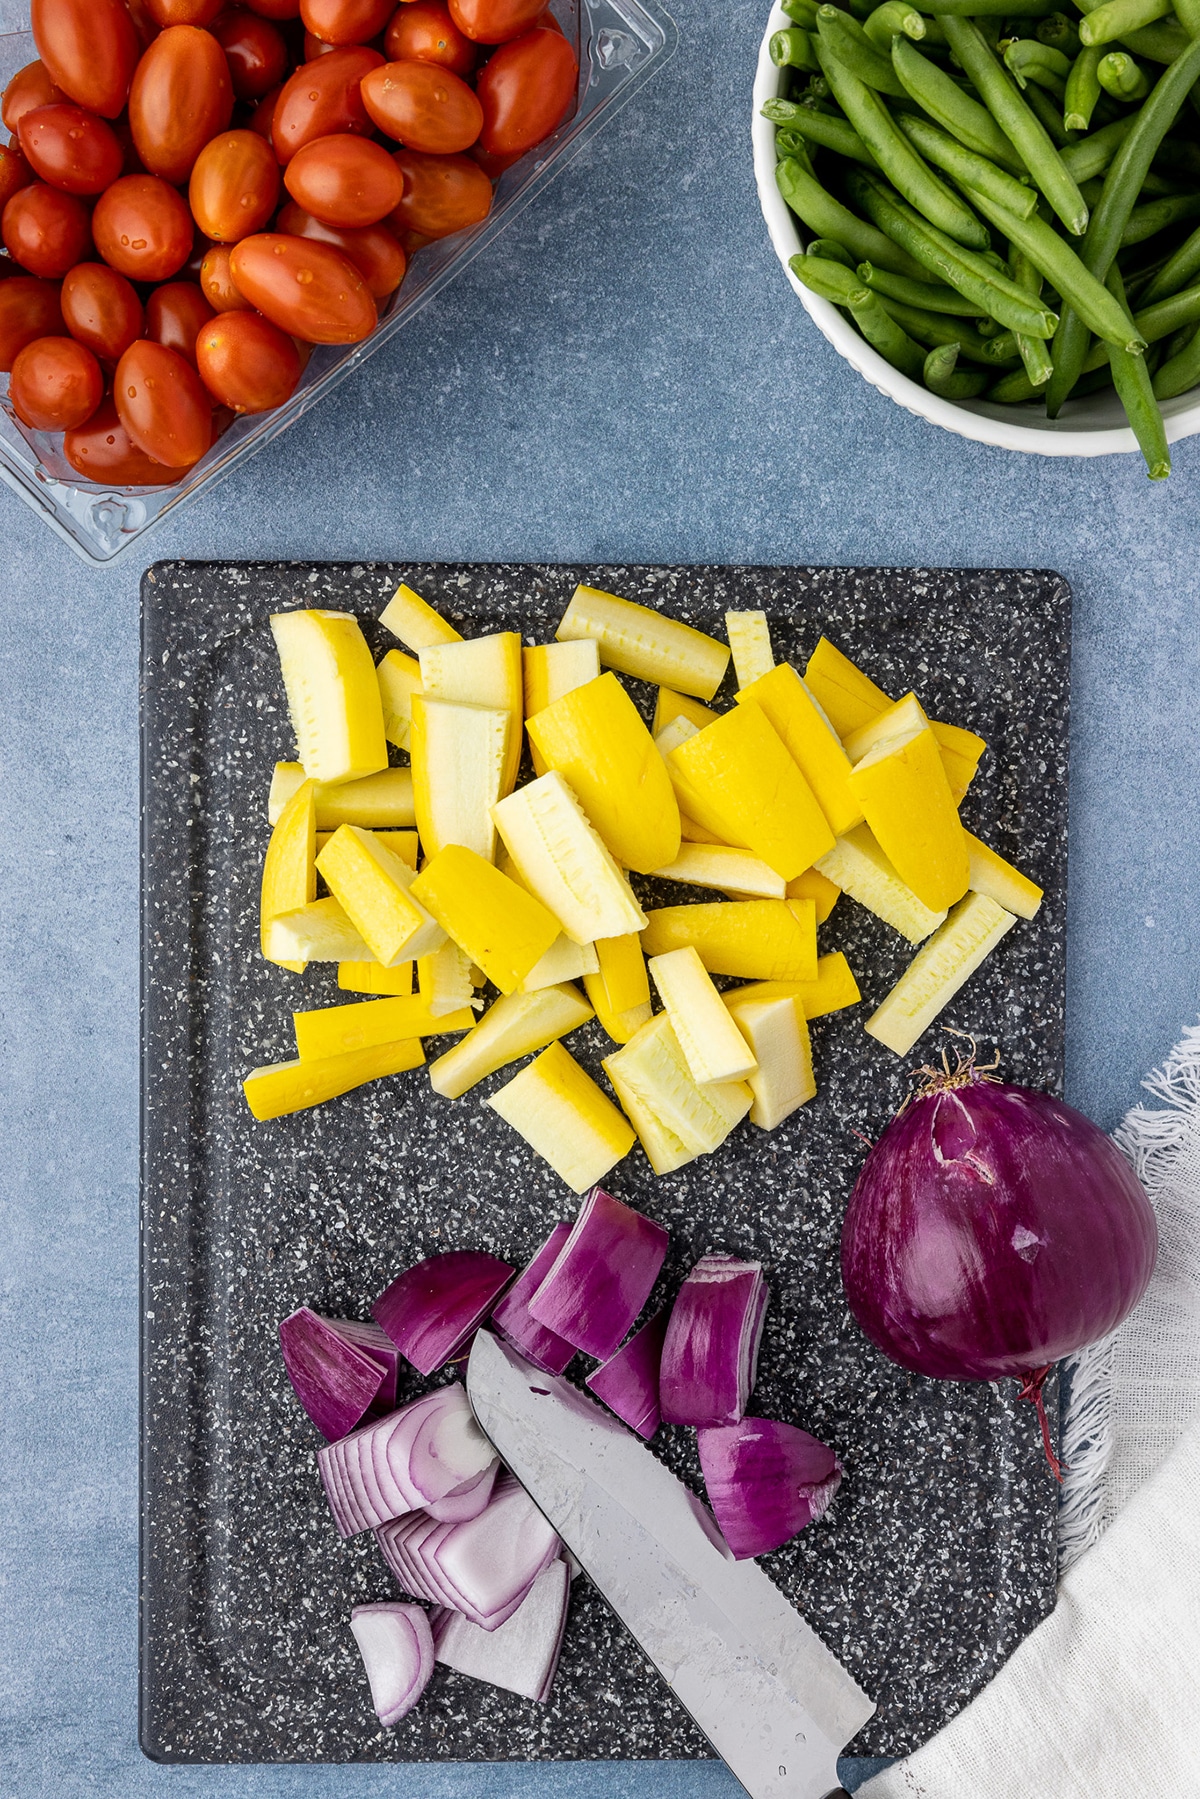 Chopped red onions and yellow squash on a cutting board, with a bowl of green beans and a container of cherry tomatoes in the background. 